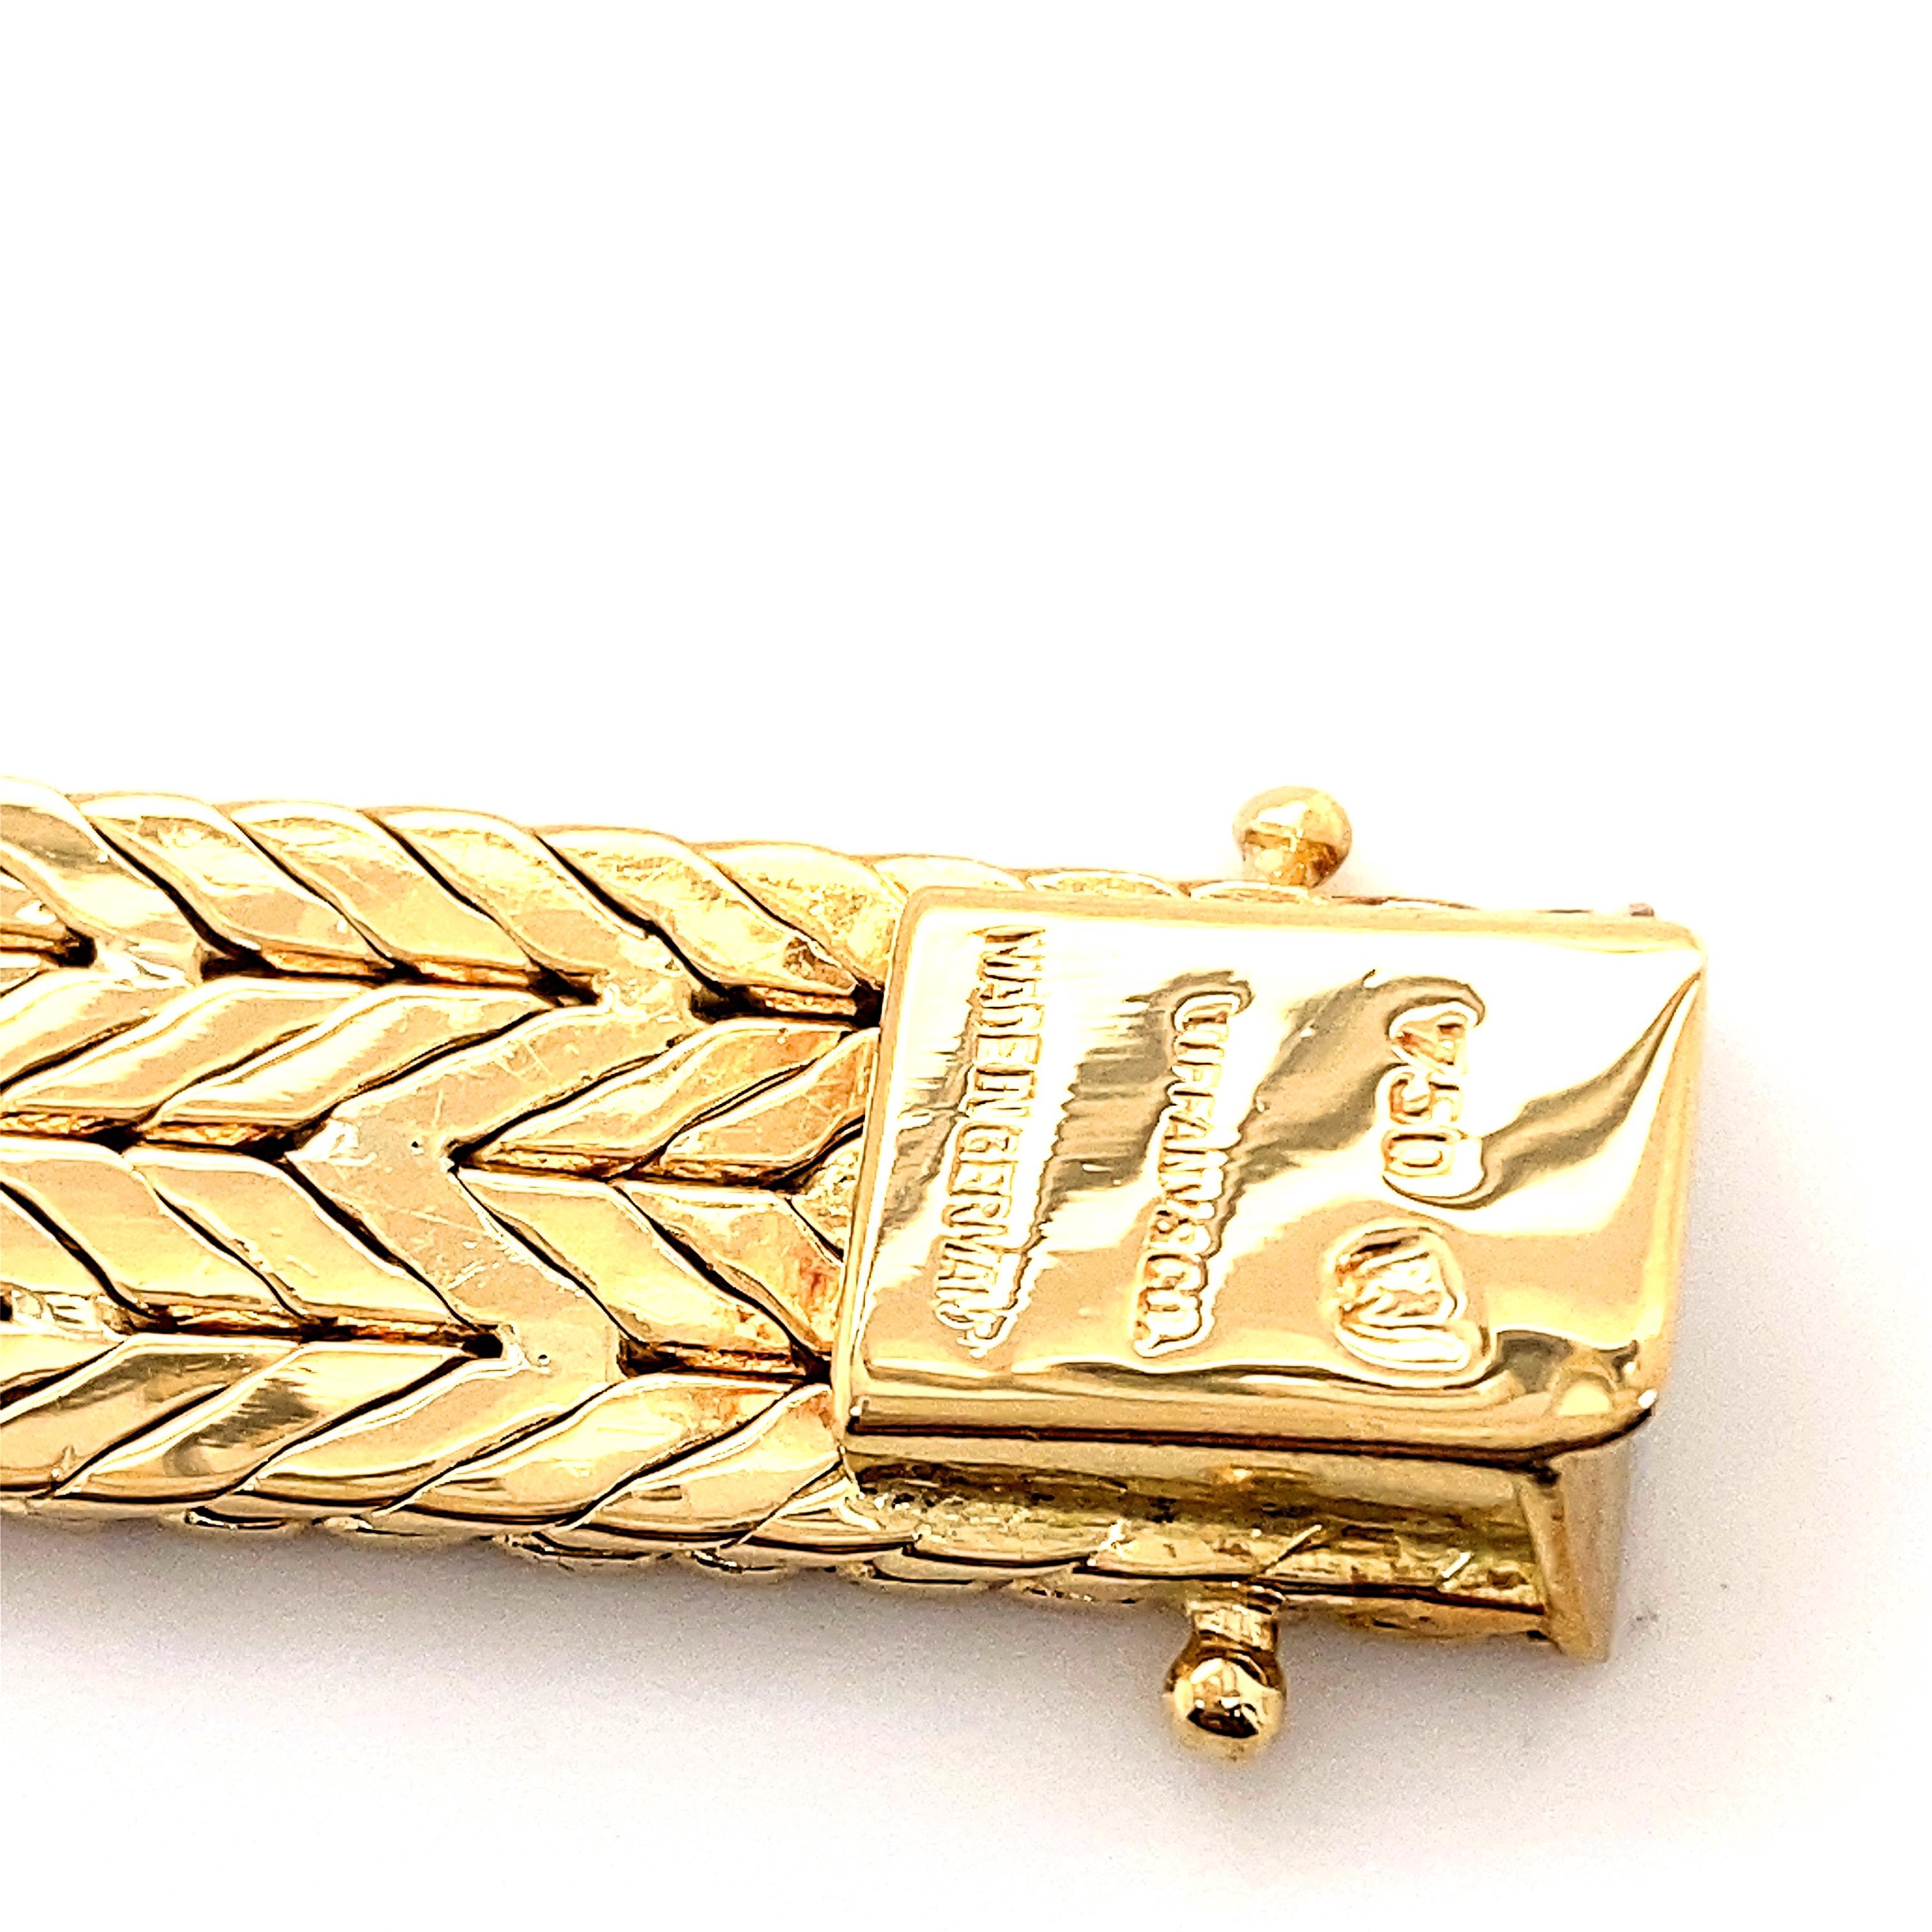 Tiffany & Co West Germany Double Row Herringbone Woven Bracelet 18kt Yellow Gold In Excellent Condition For Sale In San Diego, CA